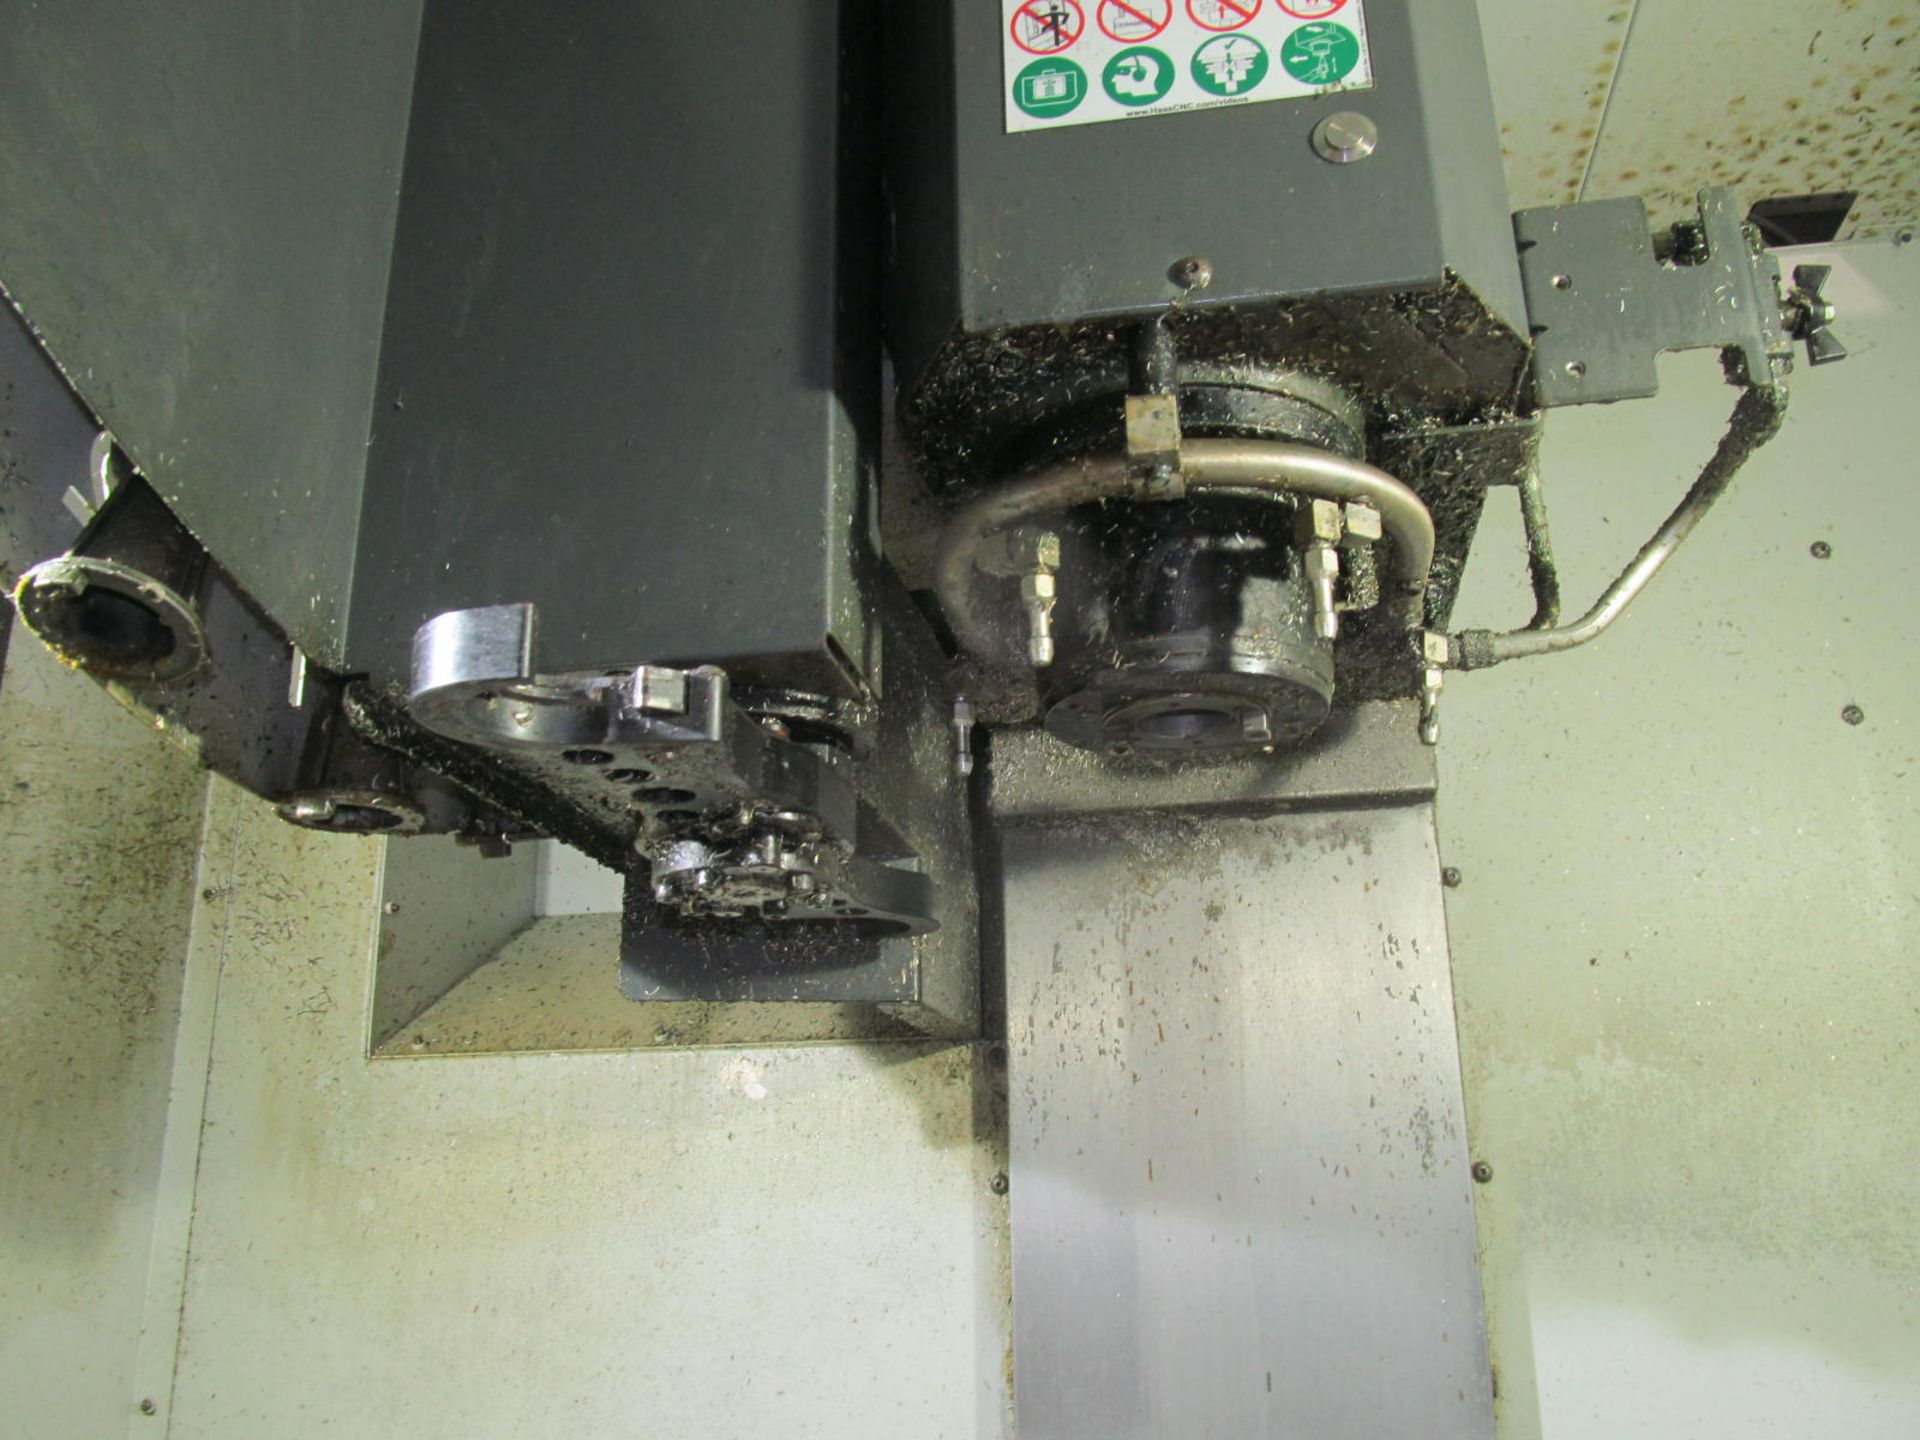 Haas DM-1 High-Performance CNC Drill/Mill Center - Image 4 of 7